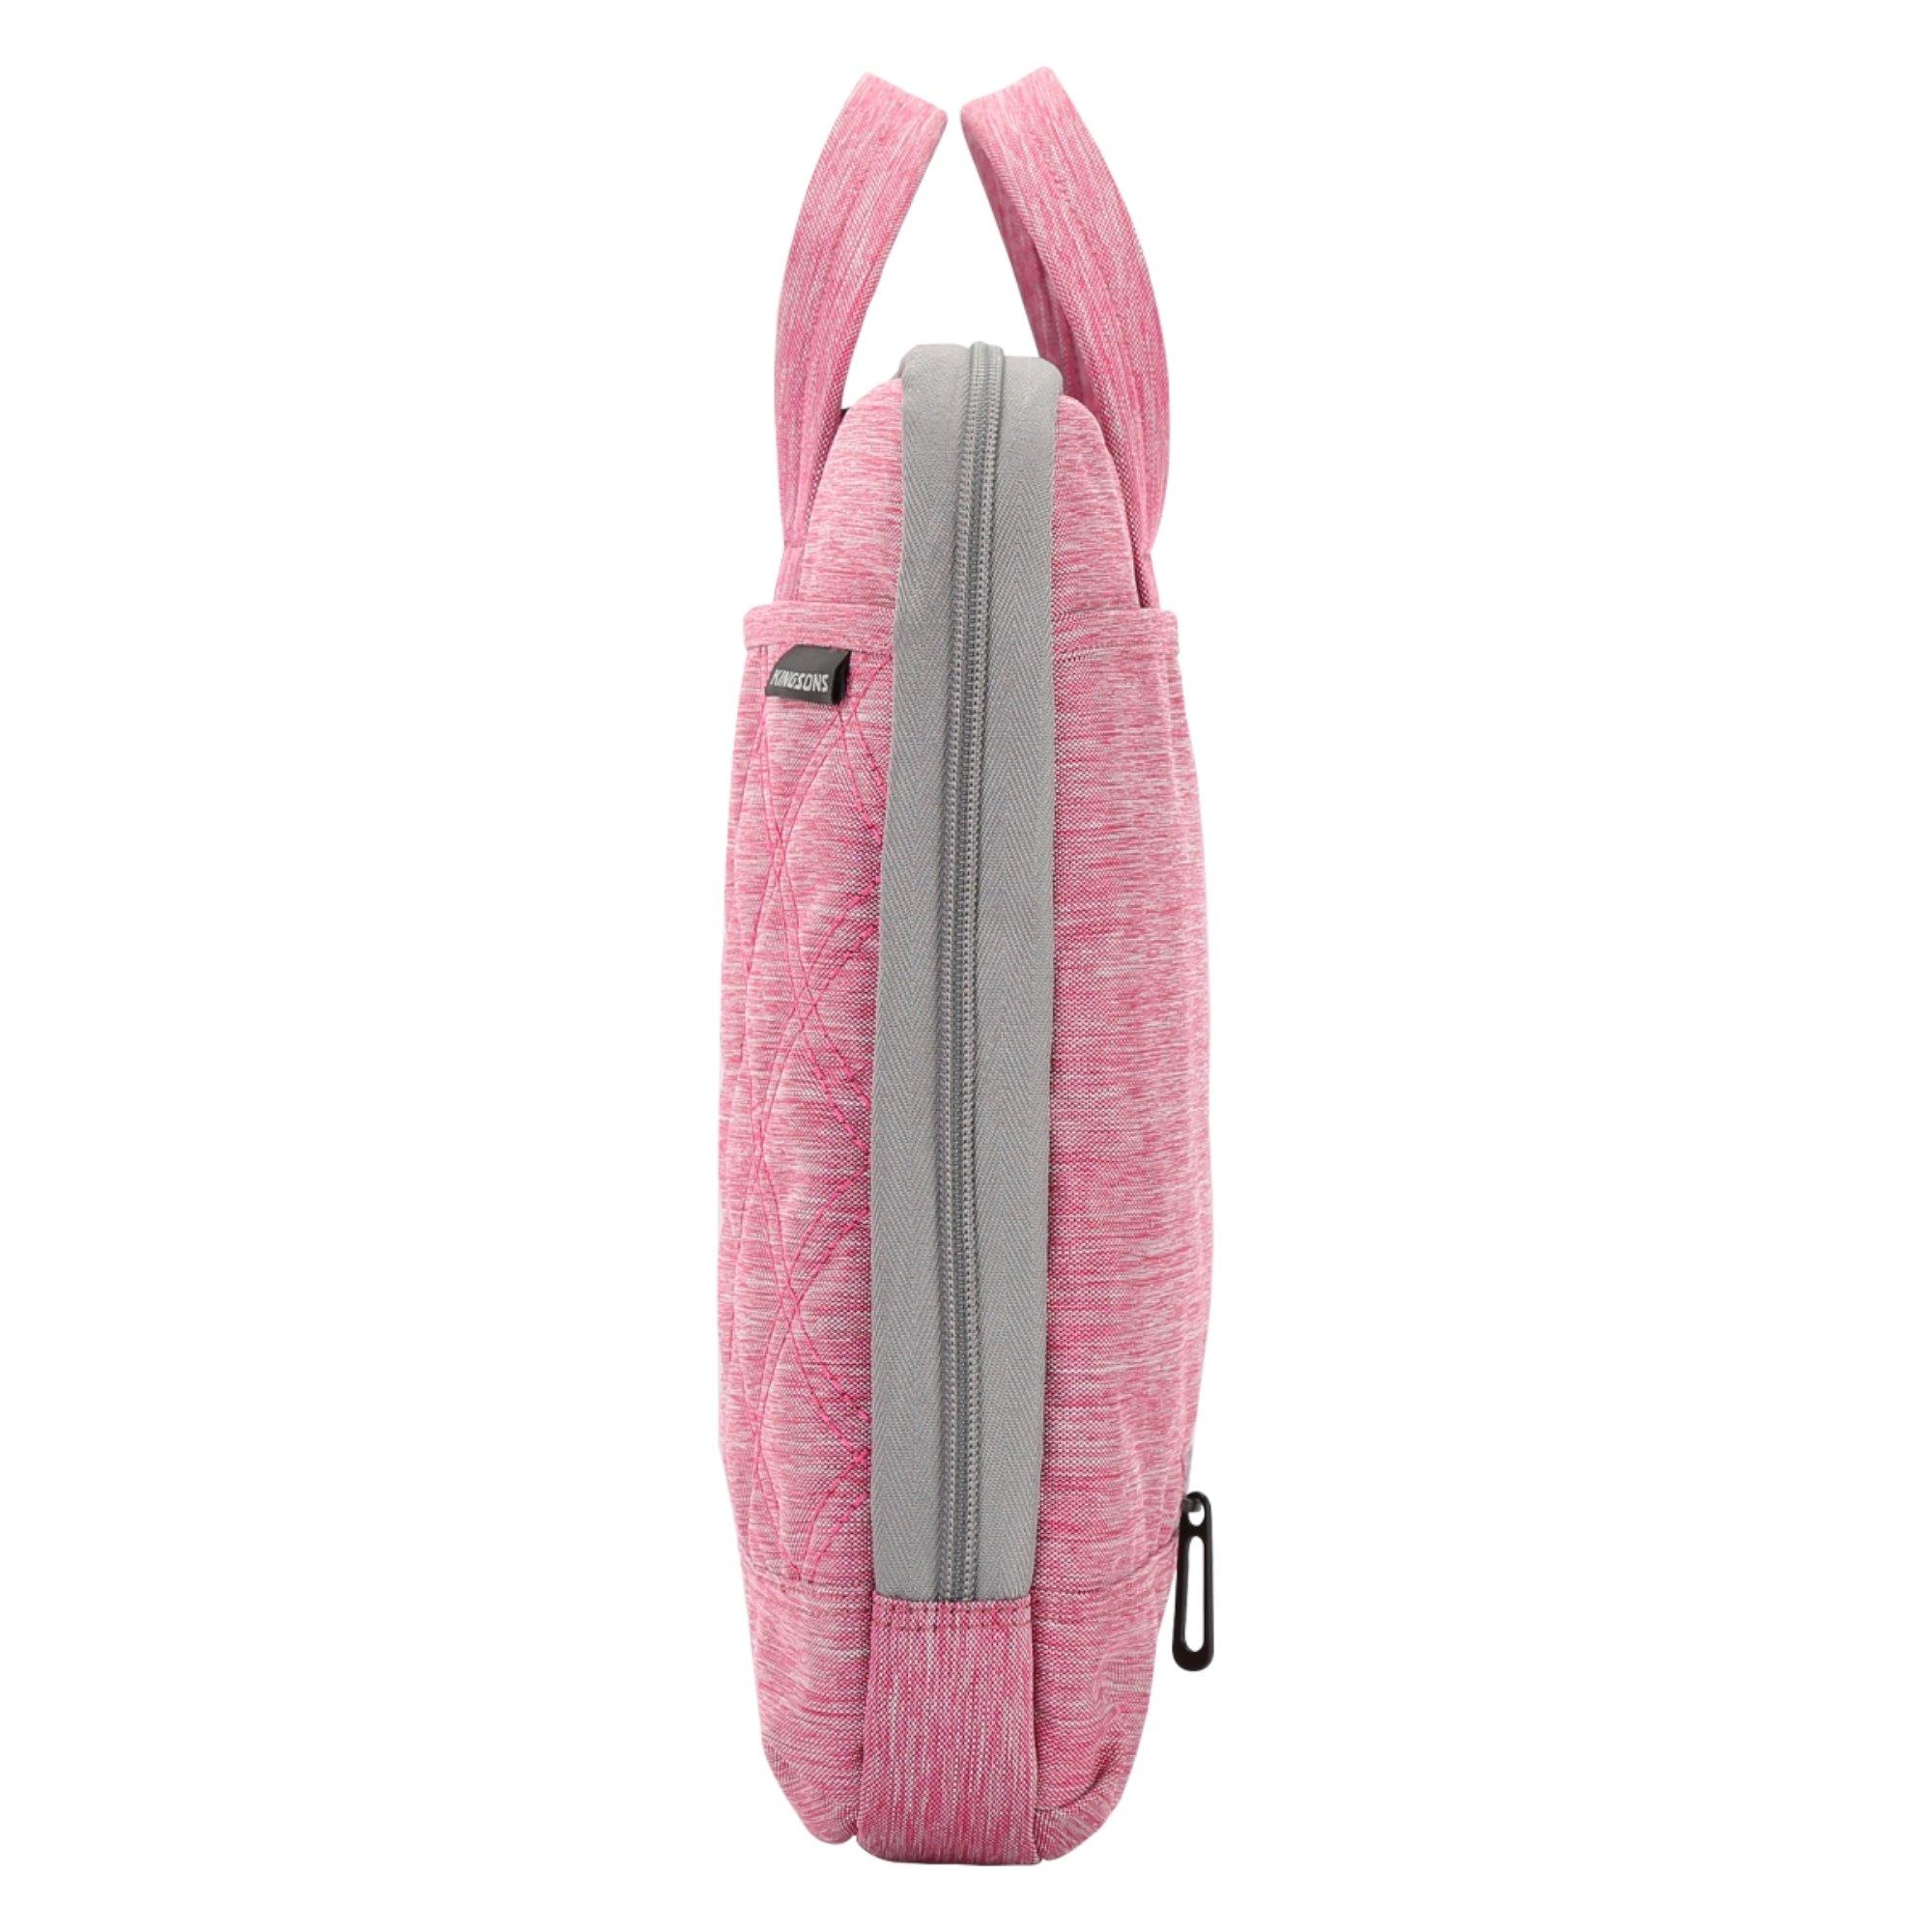 list item 3 of 4 Kingsons Trace Series Womens Laptop Bag Pink